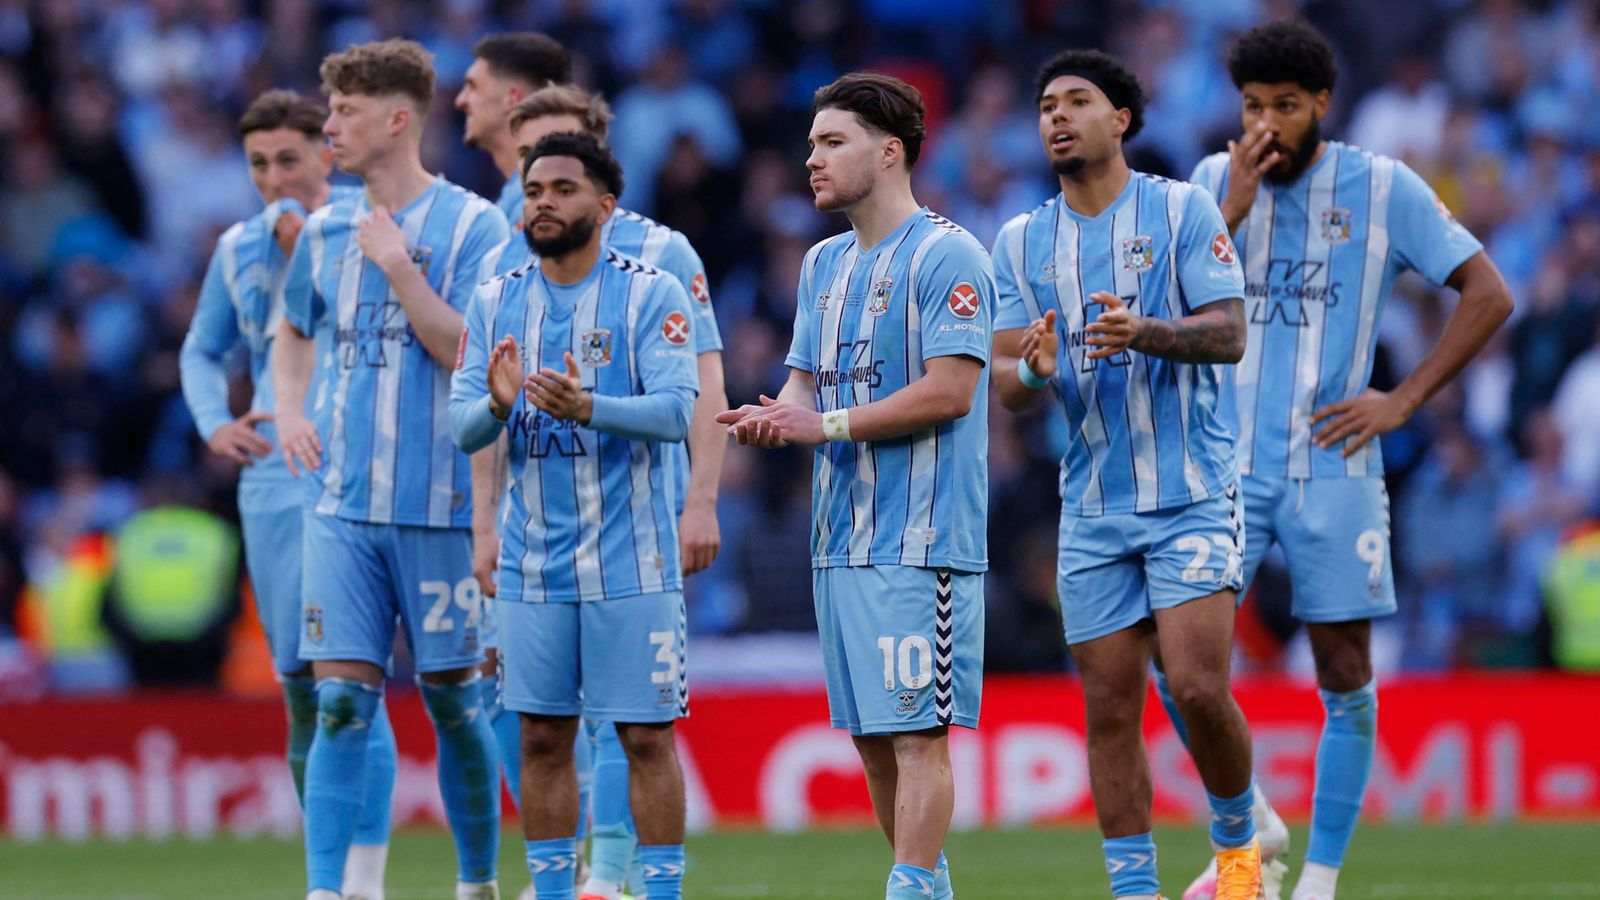 heartbreak for coventry city as they lose to man utd in dramatic fa cup semi-final